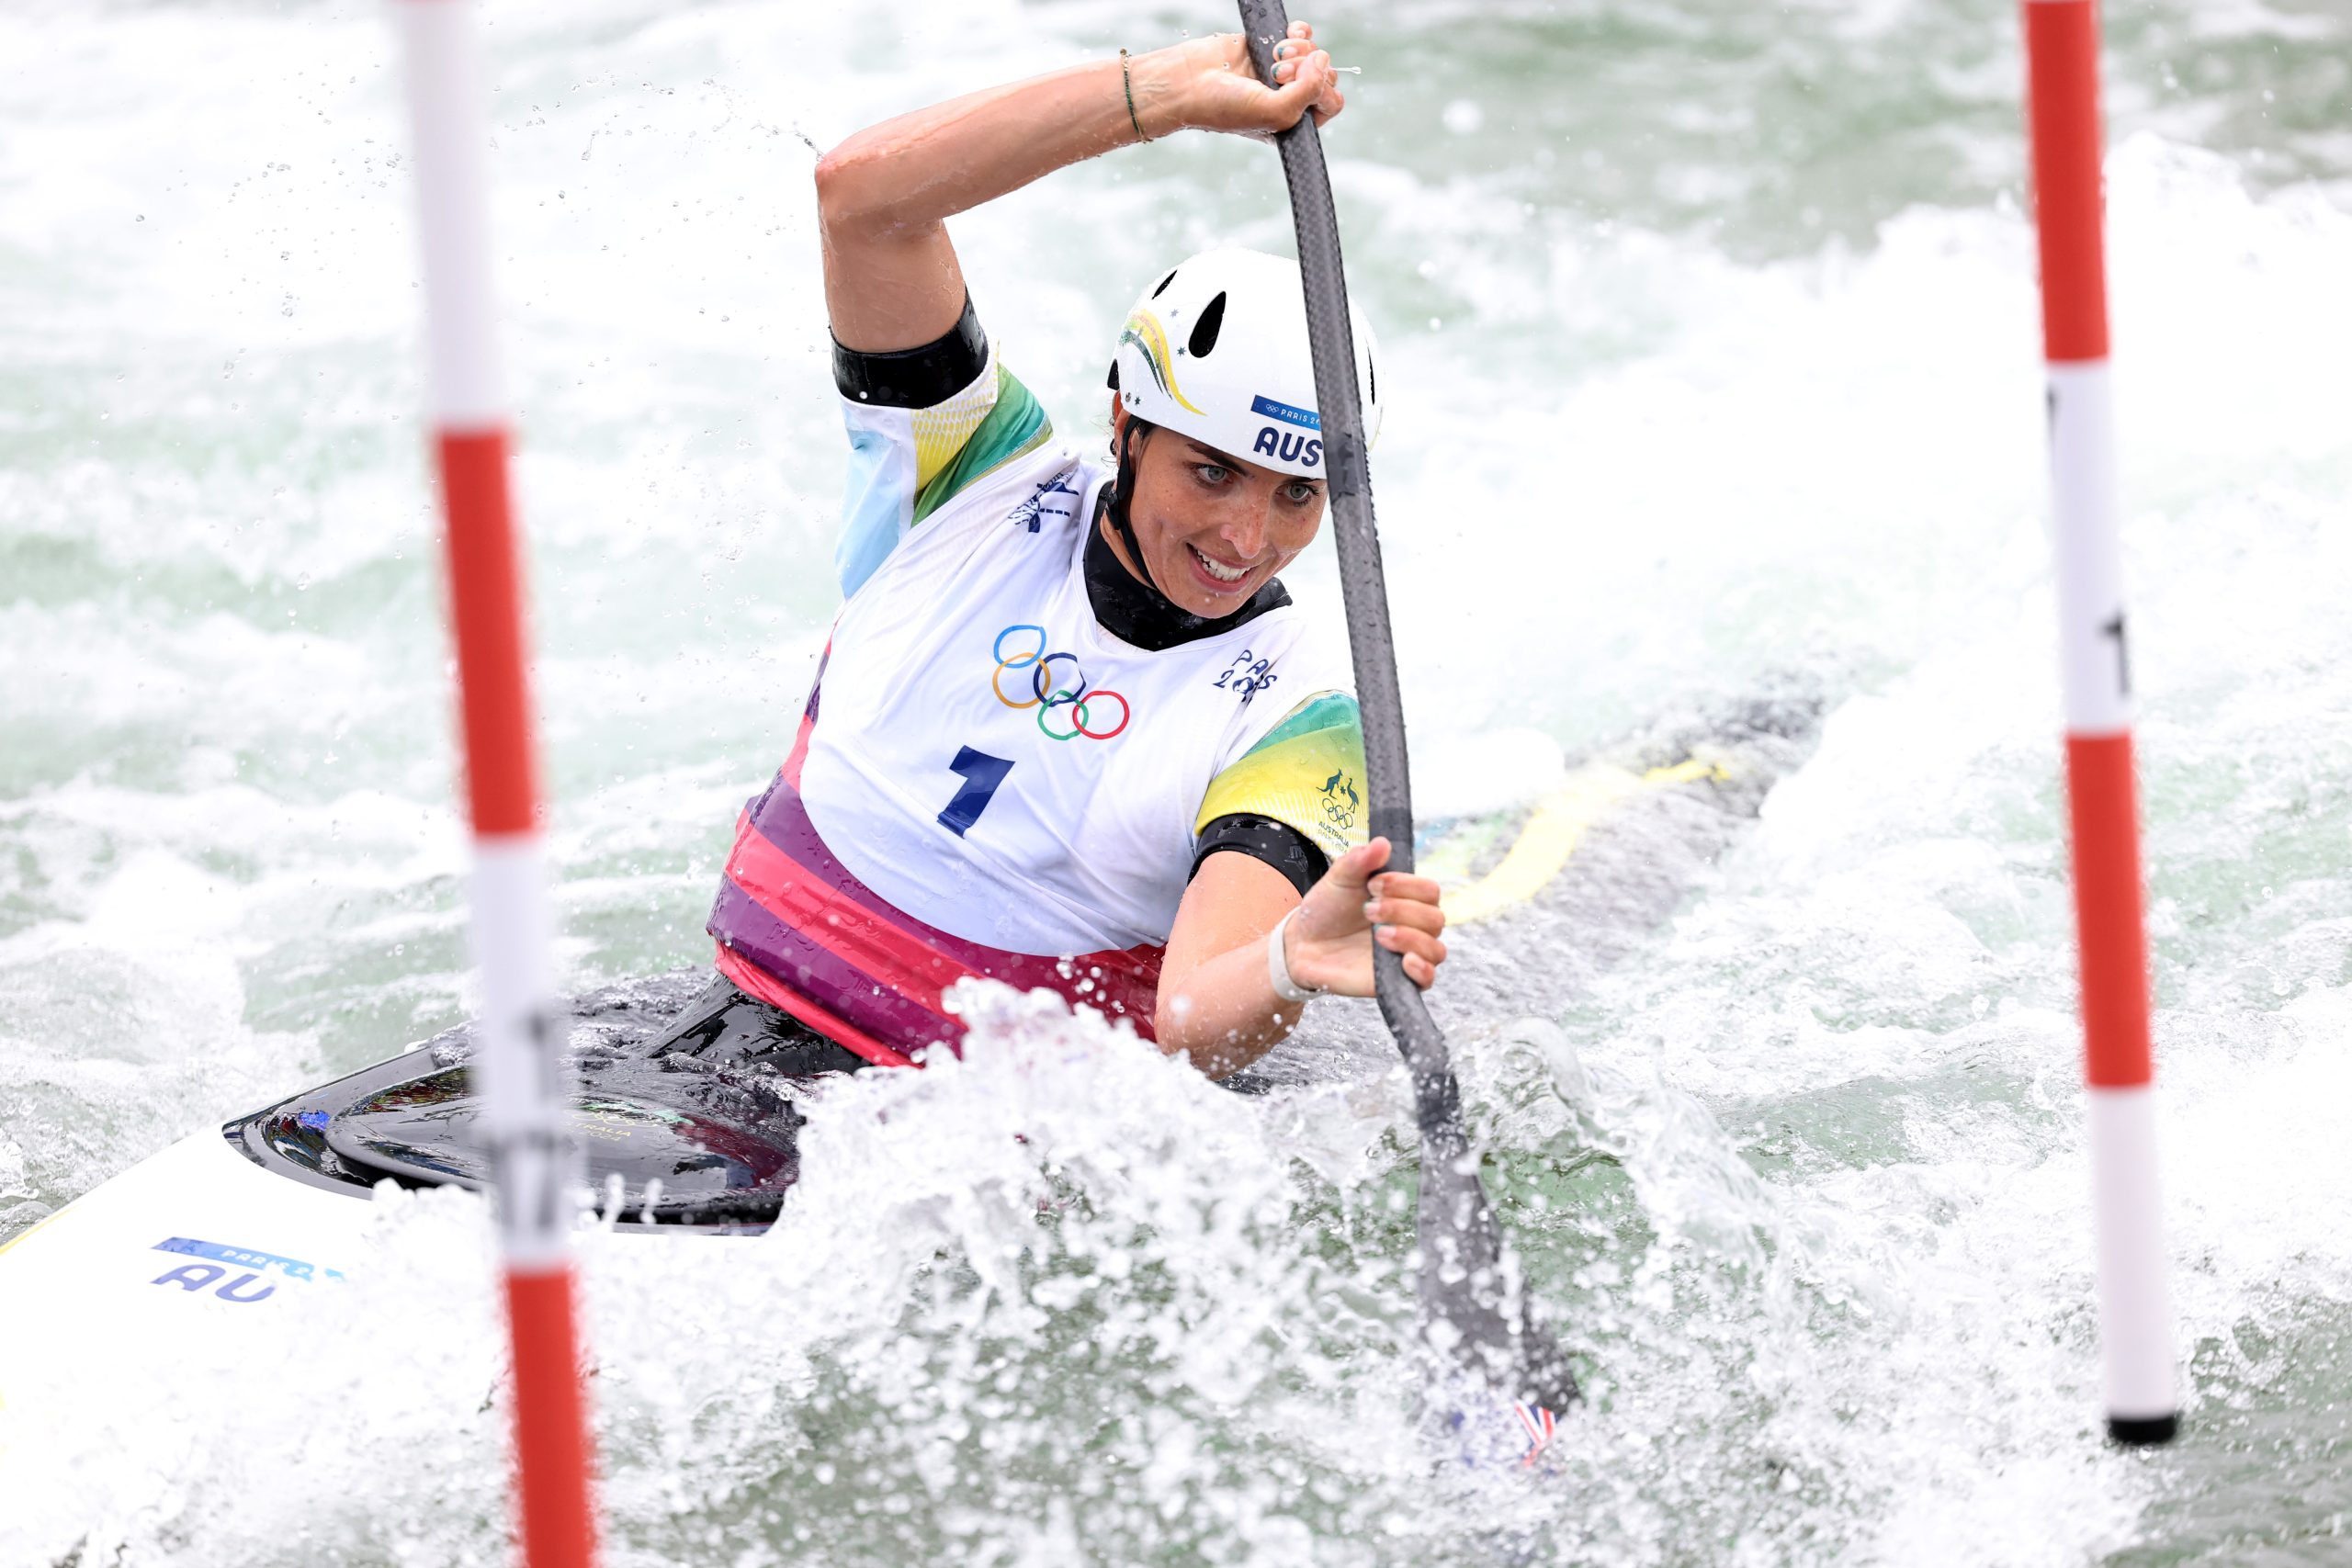 PARIS, FRANCE - JULY 27: Jessica Fox of Team Australia competes during the Women’s Kayak Single Heats 1st Run on day one of the Olympic Games Paris 2024 at Vaires-Sur-Marne Nautical Stadium on July 27, 2024 in Paris, France. (Photo by Justin Setterfield/Getty Images)